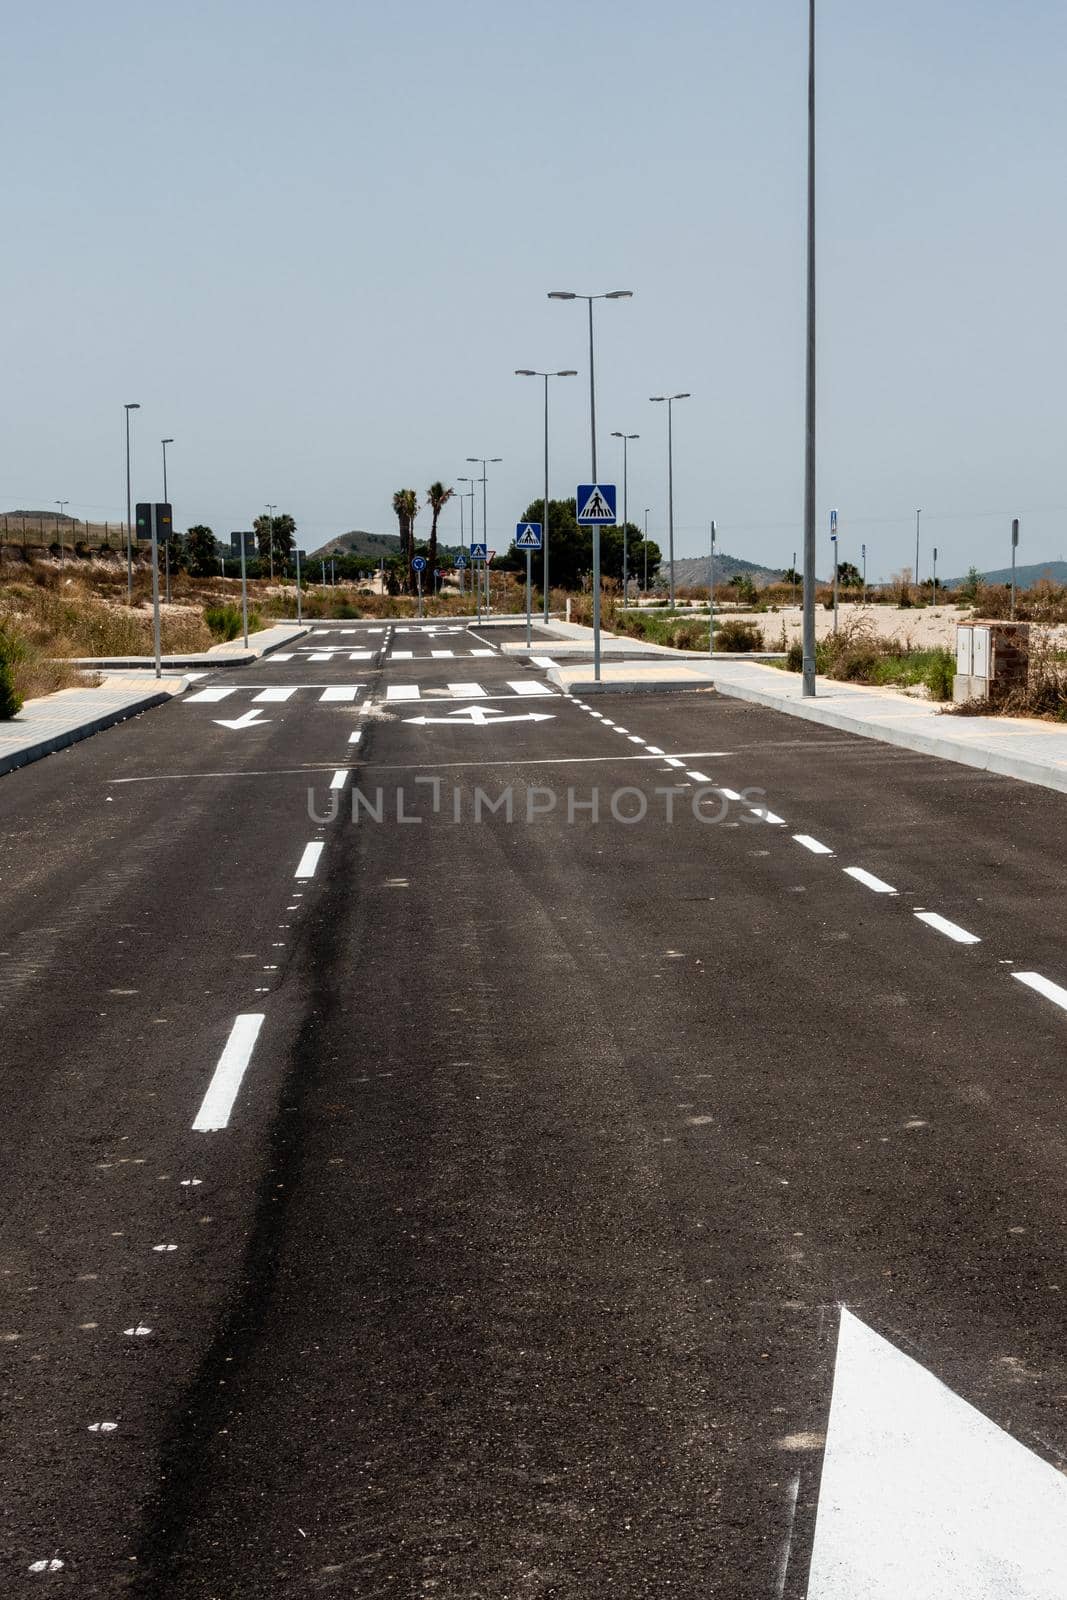 new road markings and road signs on freshly tarmacked roads on spanish urbanisation